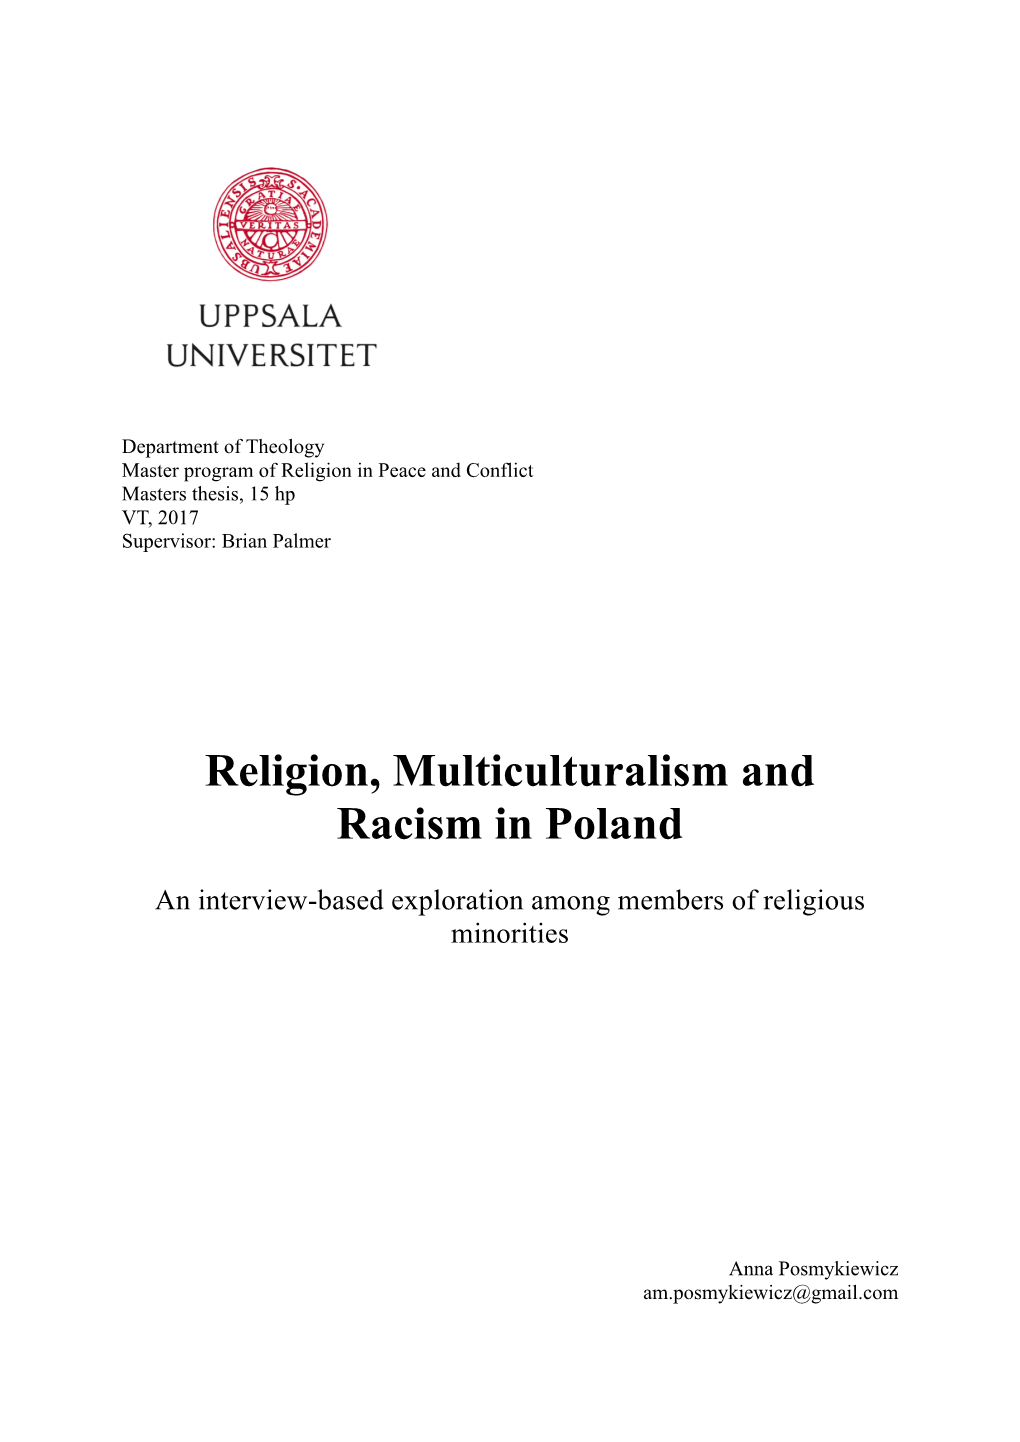 Religion, Multiculturalism and Racism in Poland